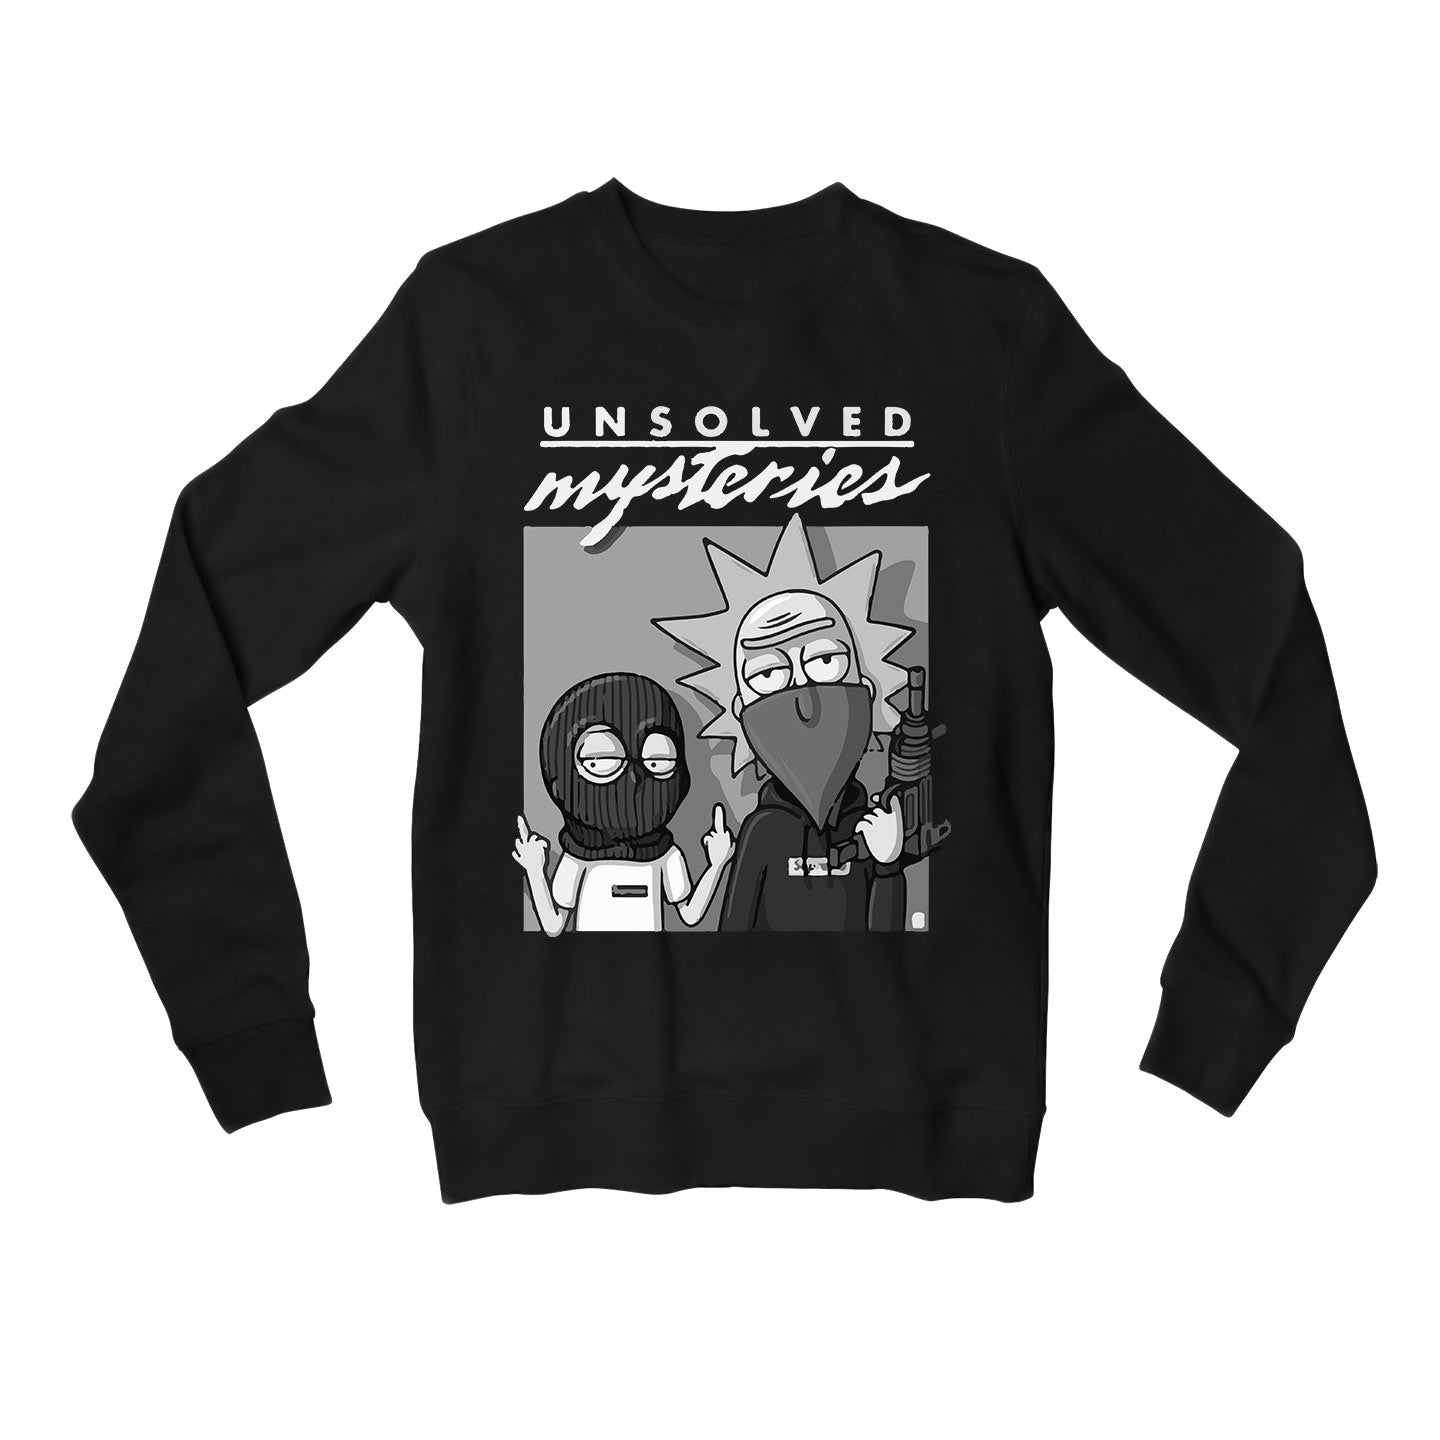 rick and morty unsolved mysteries sweatshirt upper winterwear buy online india the banyan tee tbt men women girls boys unisex black rick and morty online summer beth mr meeseeks jerry quote vector art clothing accessories merchandise